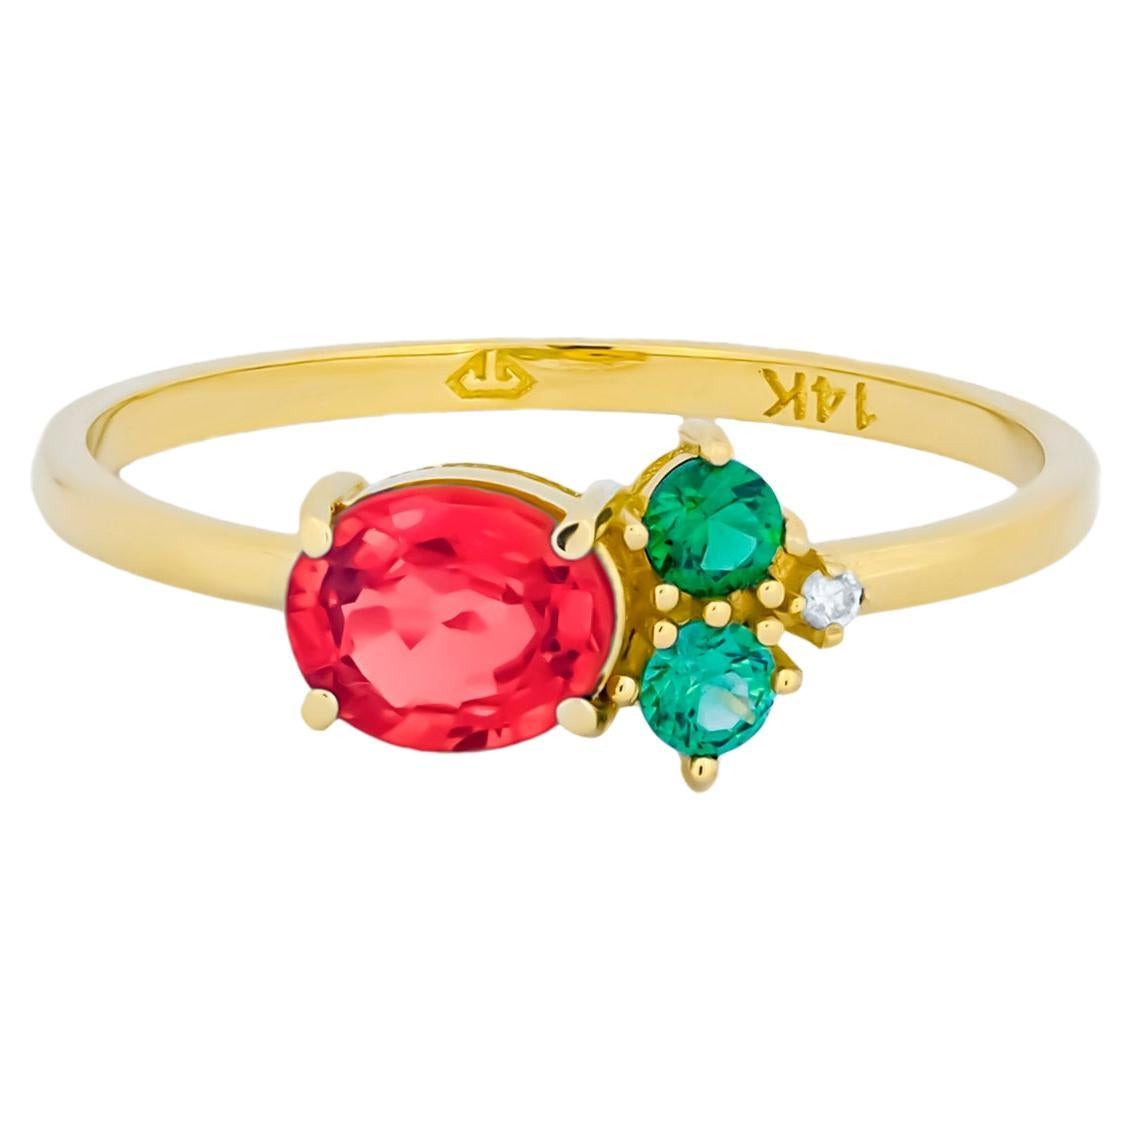 For Sale:  Oval ruby, tsavorite and diamonds 14k gold ring.